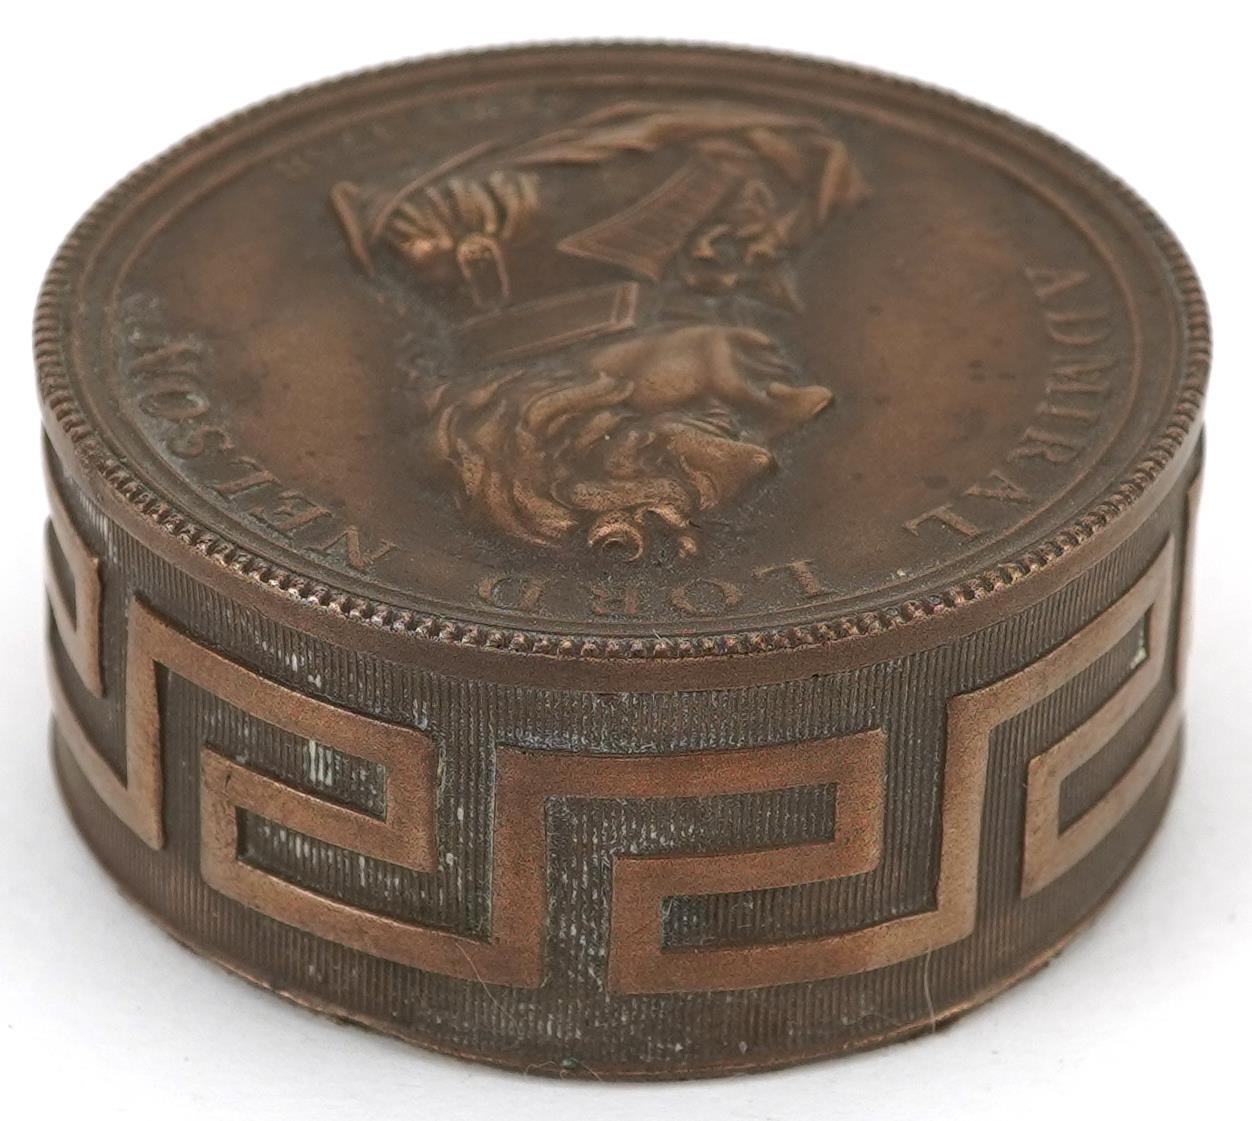 Naval interest 18th century style bronzed paperweight commemorating Admiral Lord Nelson, 5.5cm in - Image 3 of 4